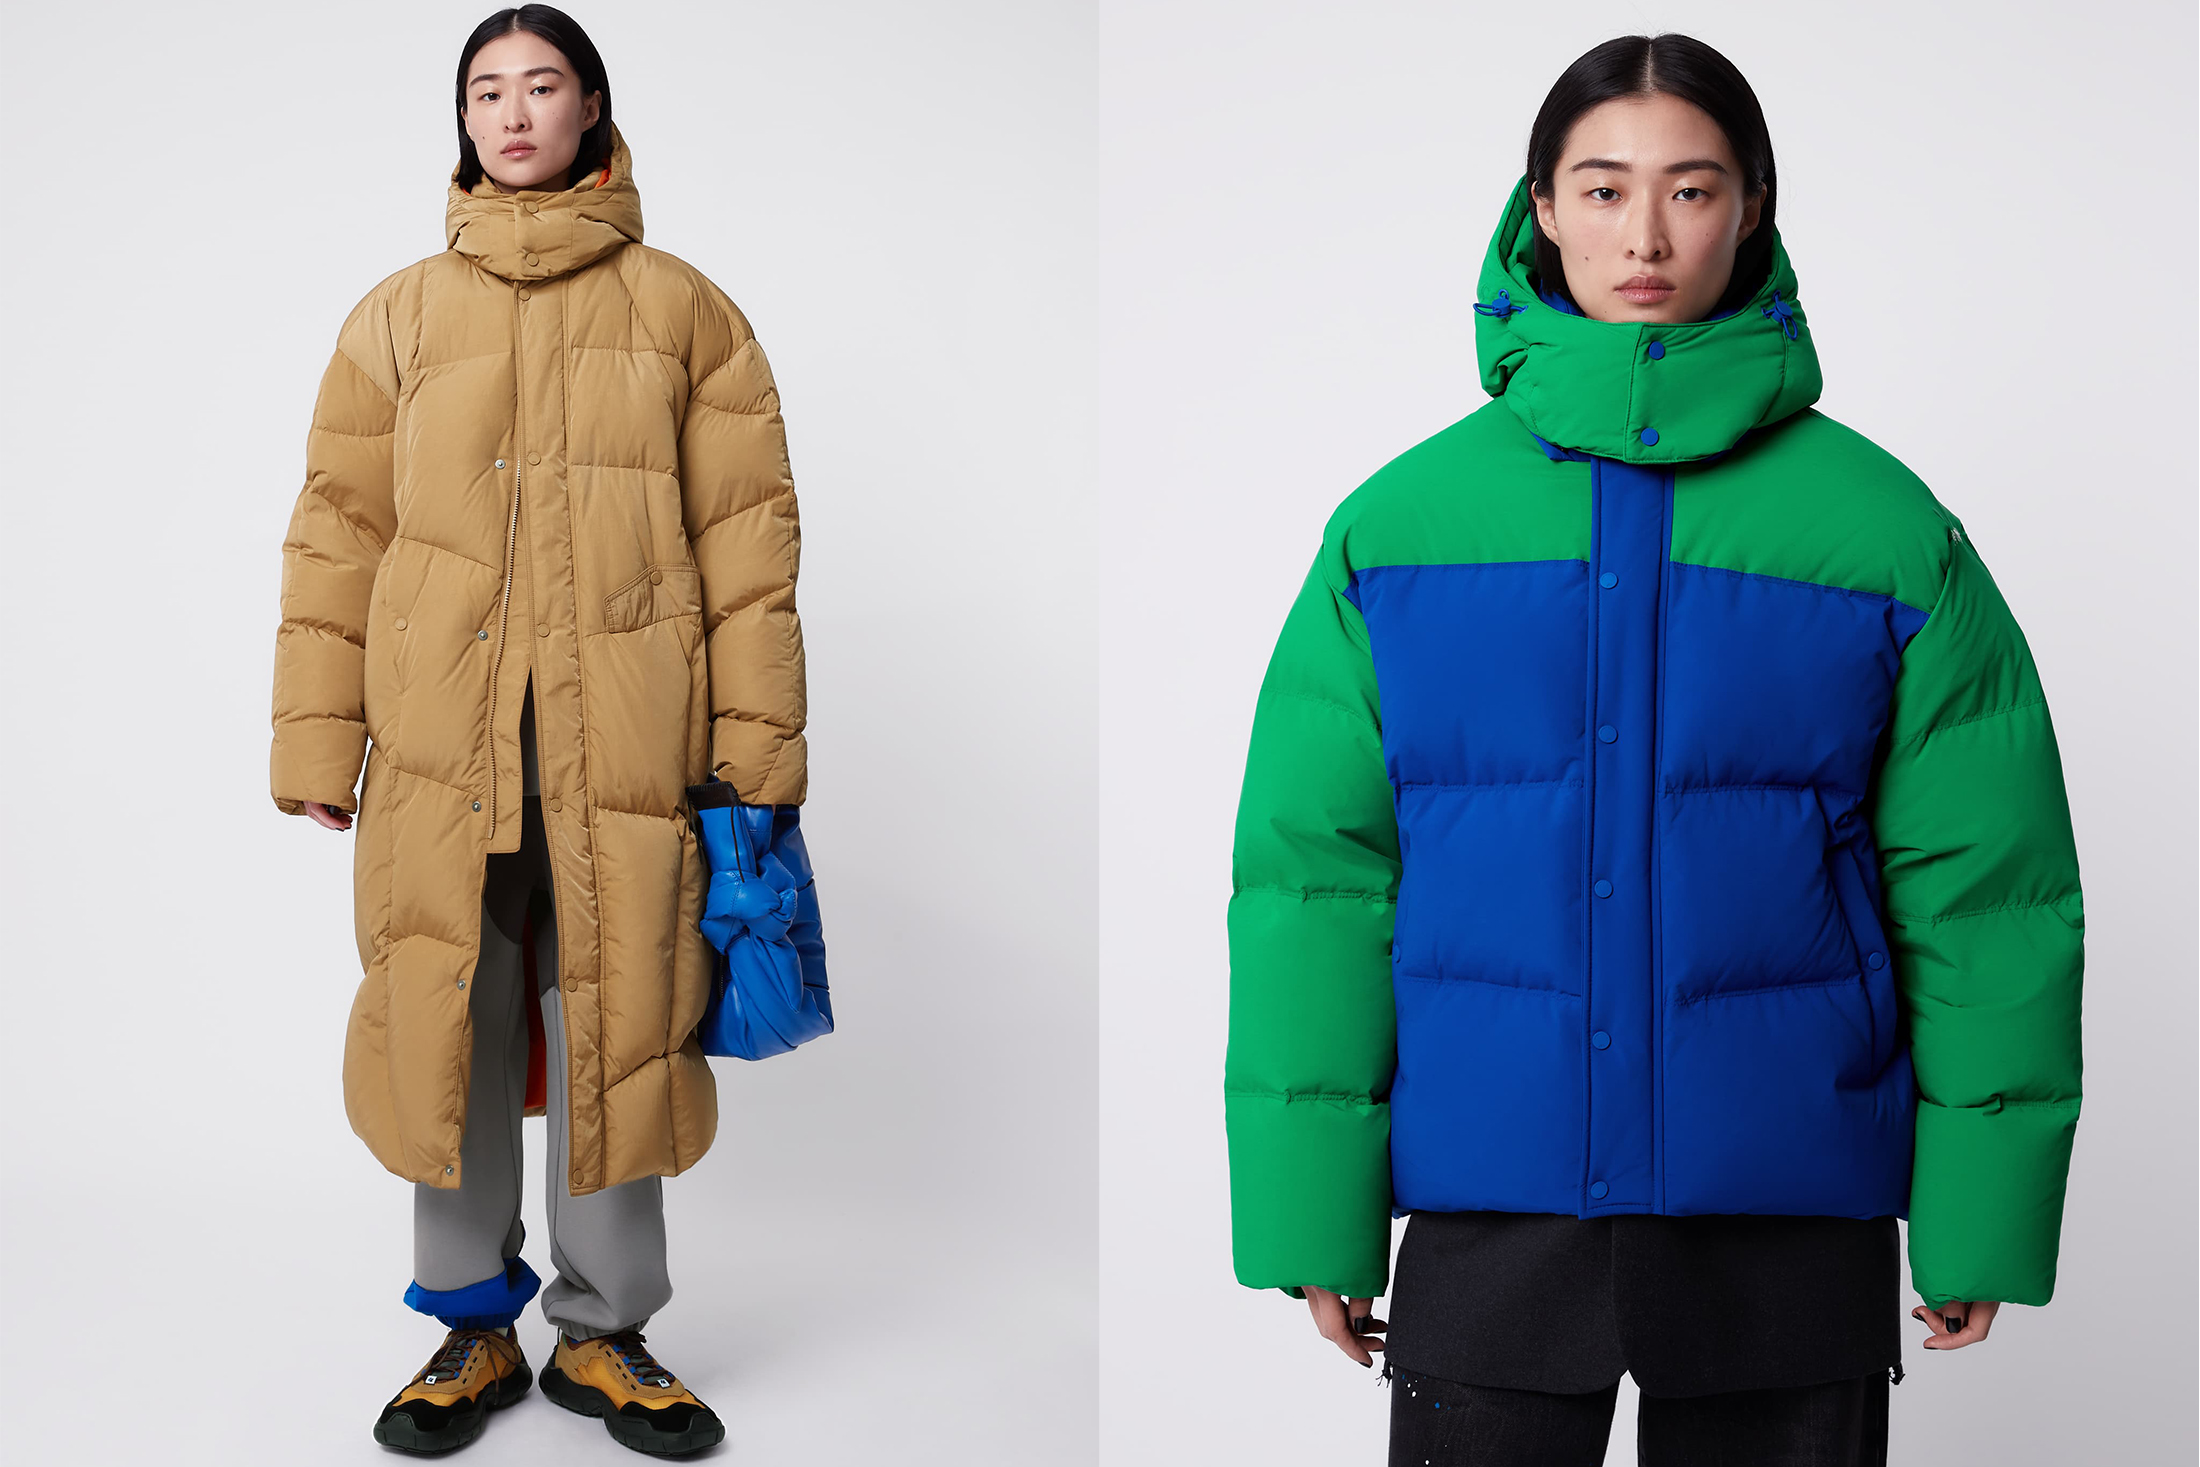 Zara And Ader Error Team Up To Launch AZ Collection - The Impression